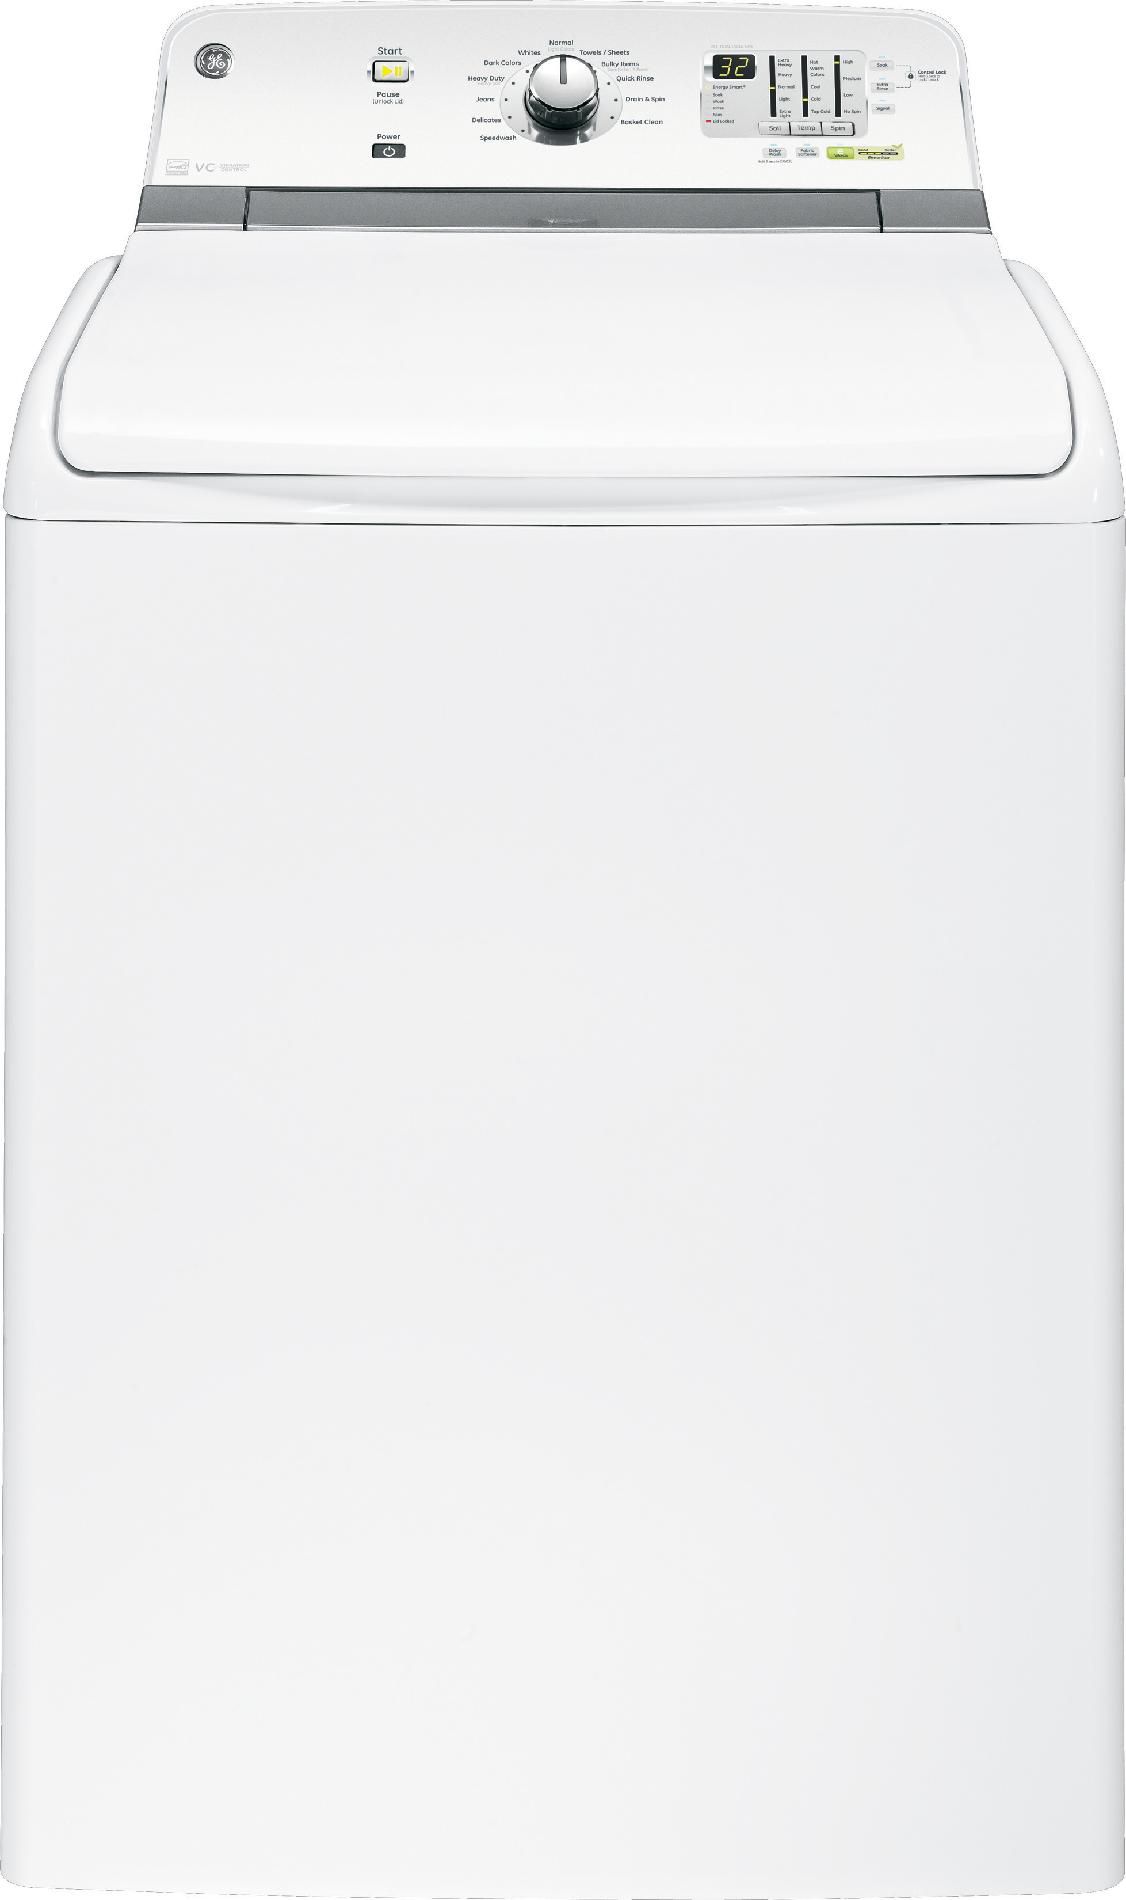 GE 4.6 cu. ft. High-Efficiency Top-Load Washer w/ Stainless Steel Basket - White 4.6 cu.ft. and greater